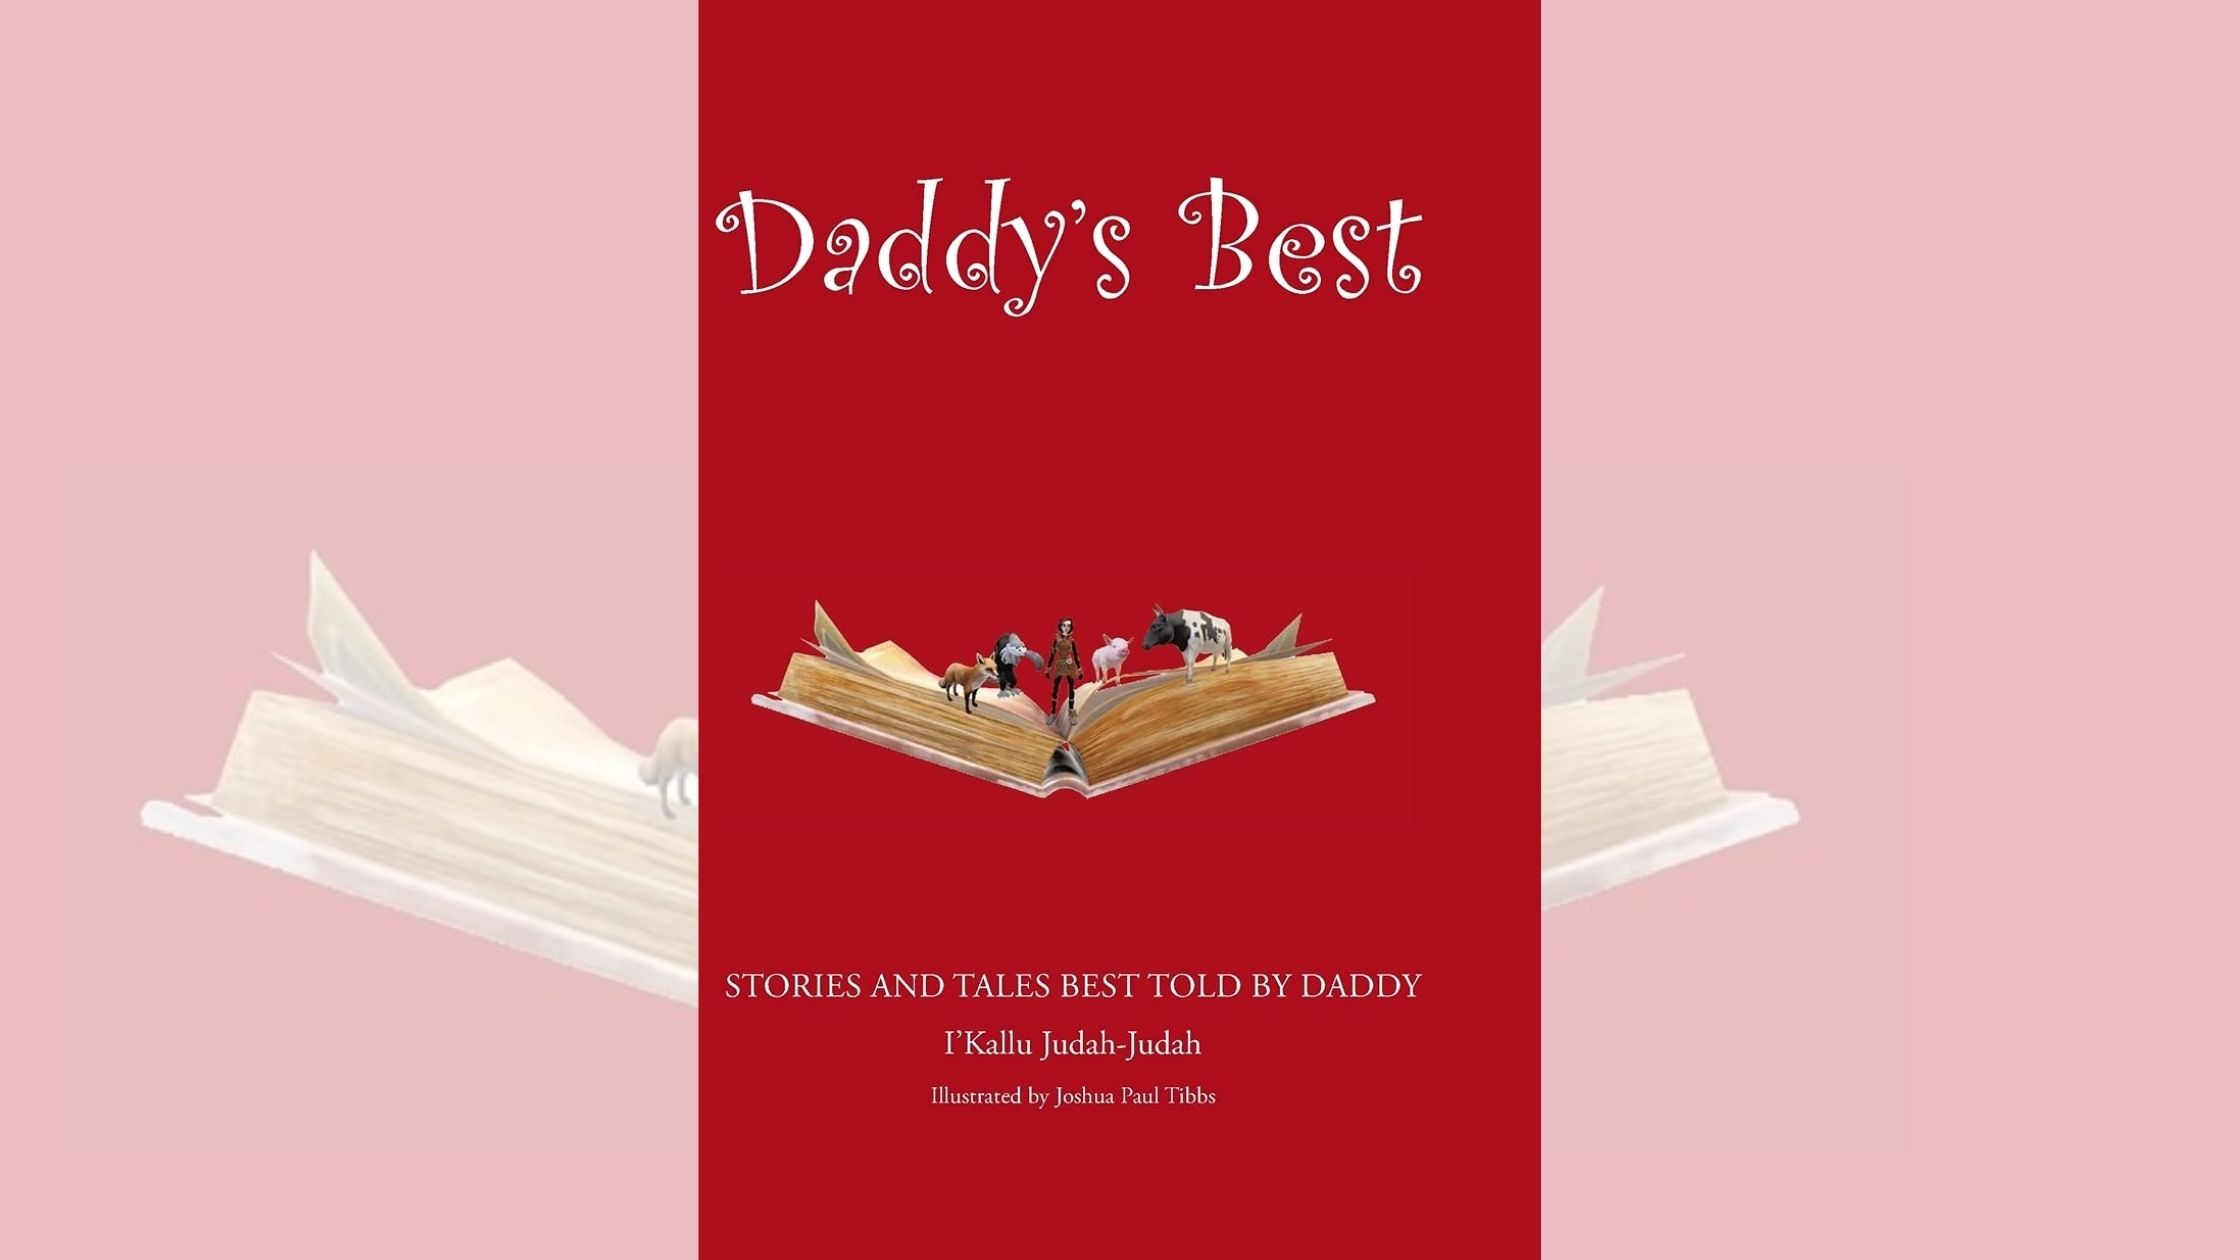 I’Kallu Judah-Judah’s newly released “Daddy’s Best: Stories and Tales Best Told by Daddy” is a fun-filled collection of stories with important moral lessons